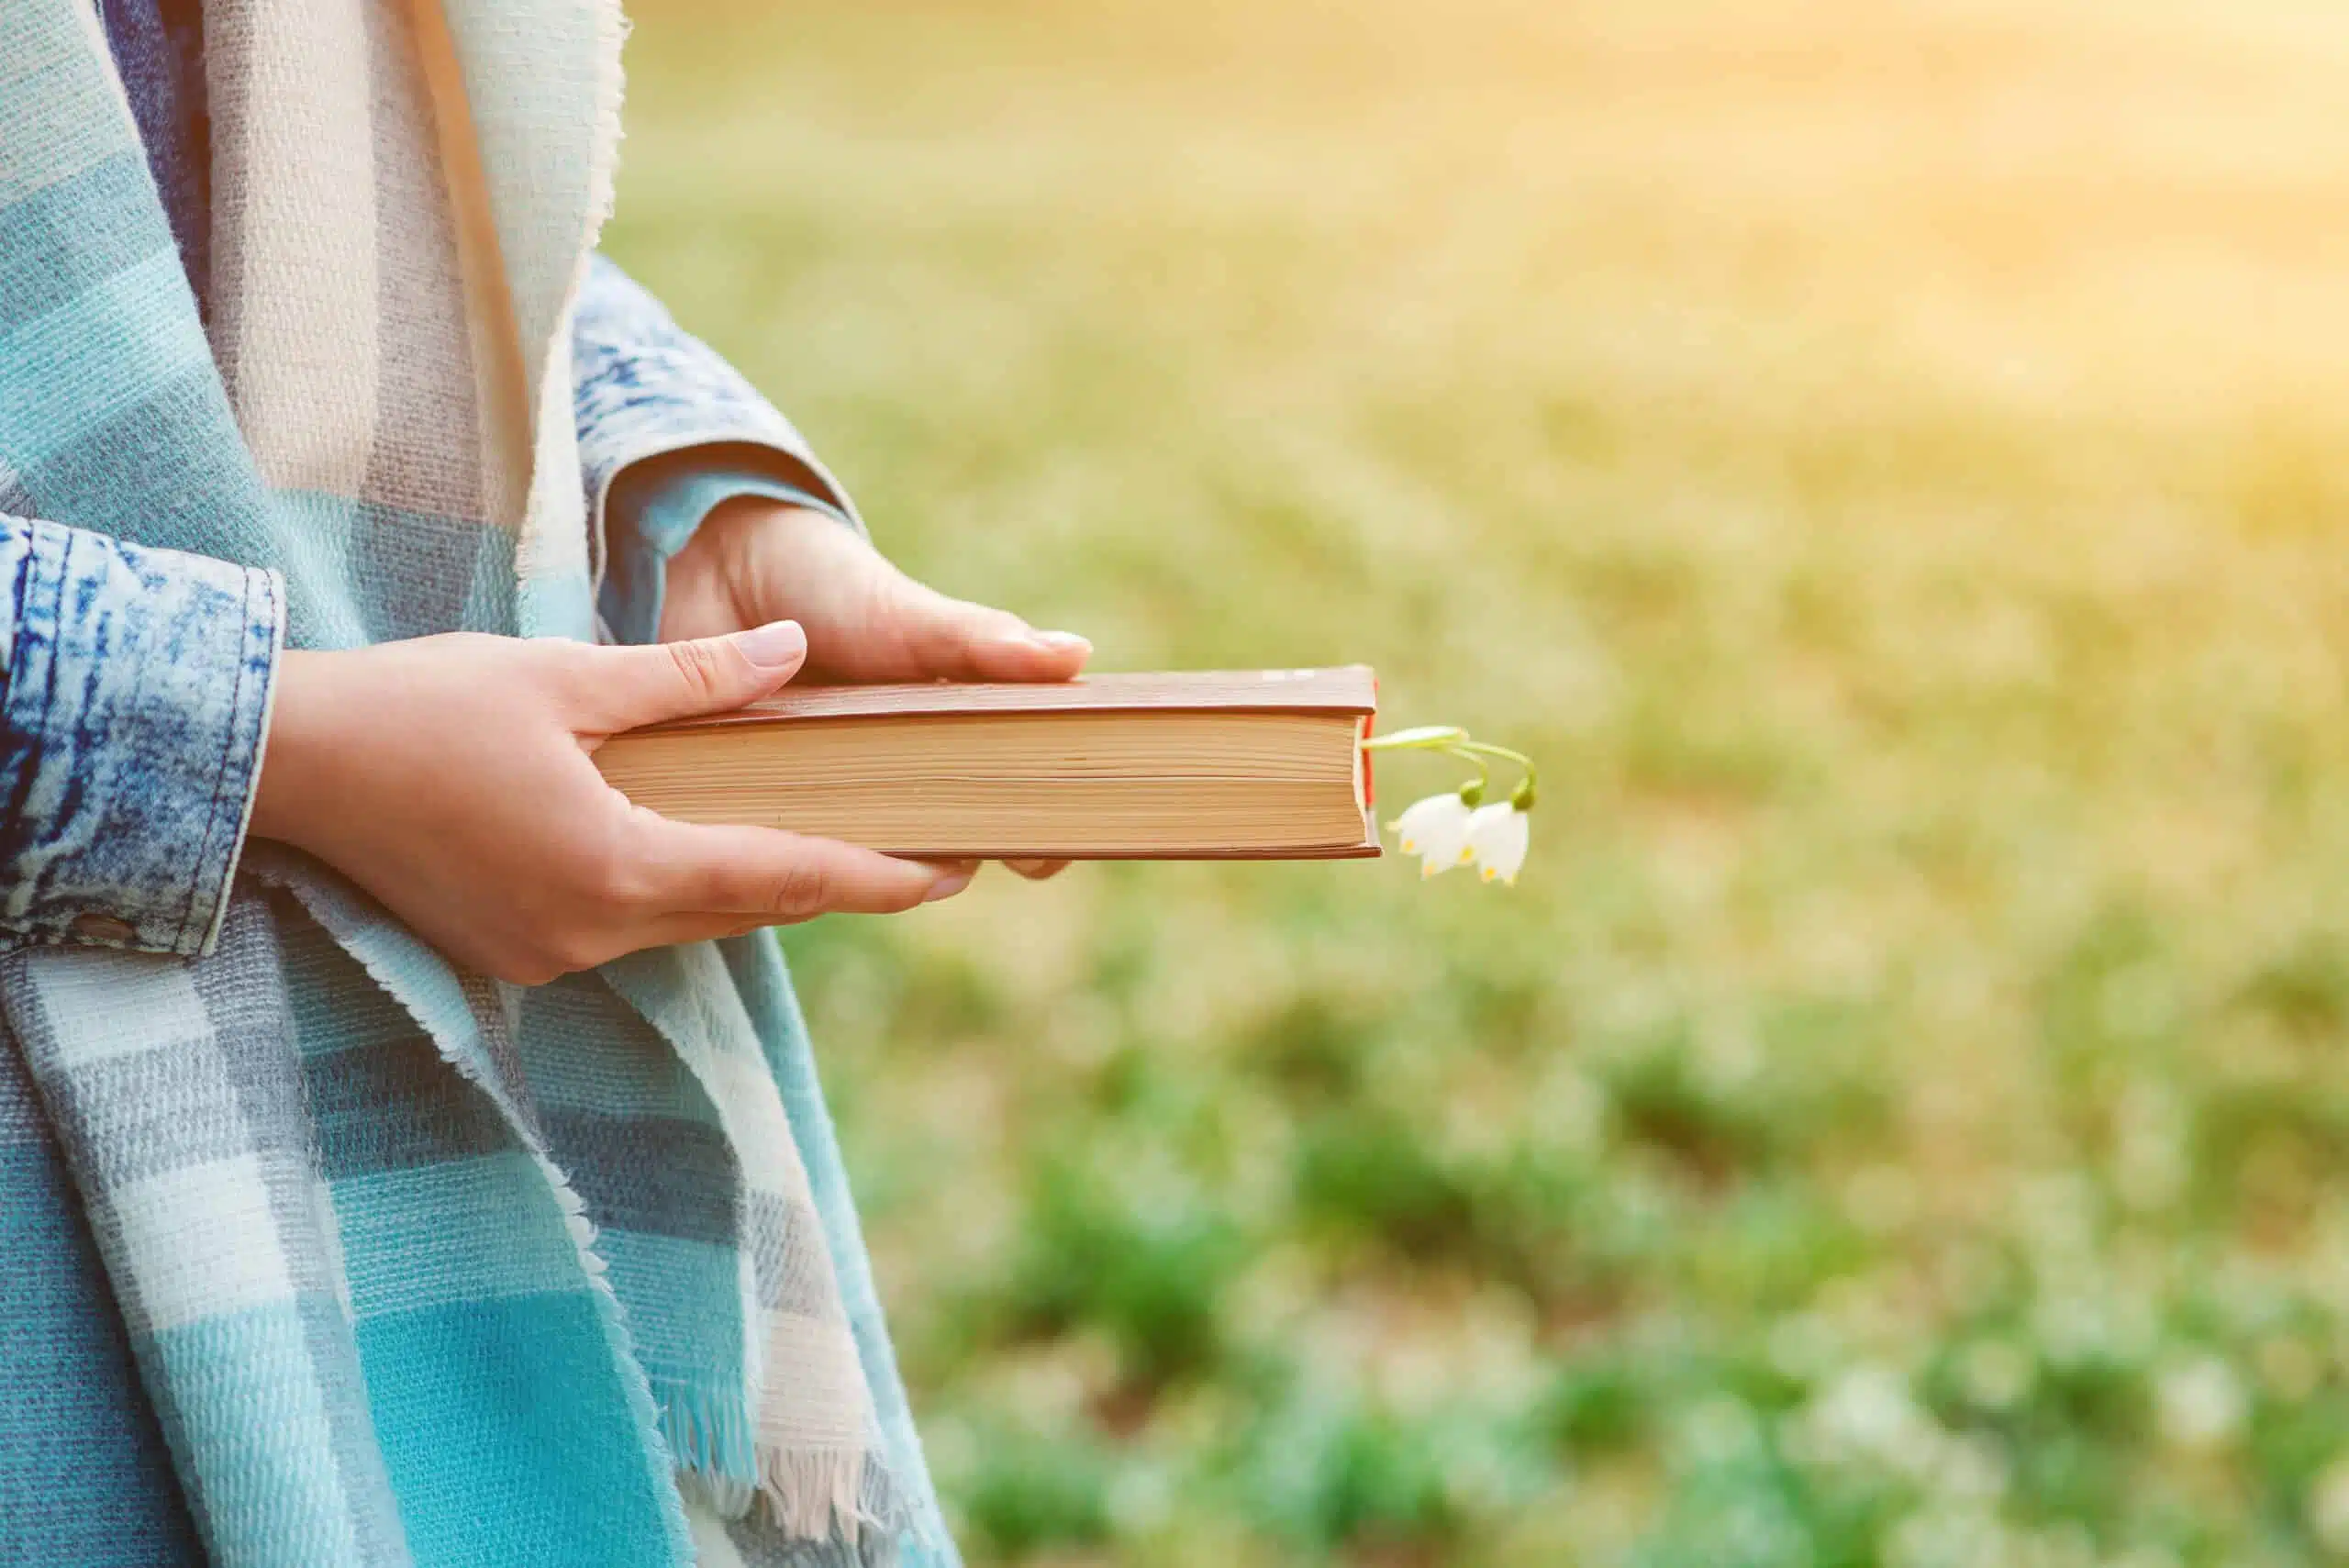 Woman holding a book, lilies of the valley inserted in between pages.